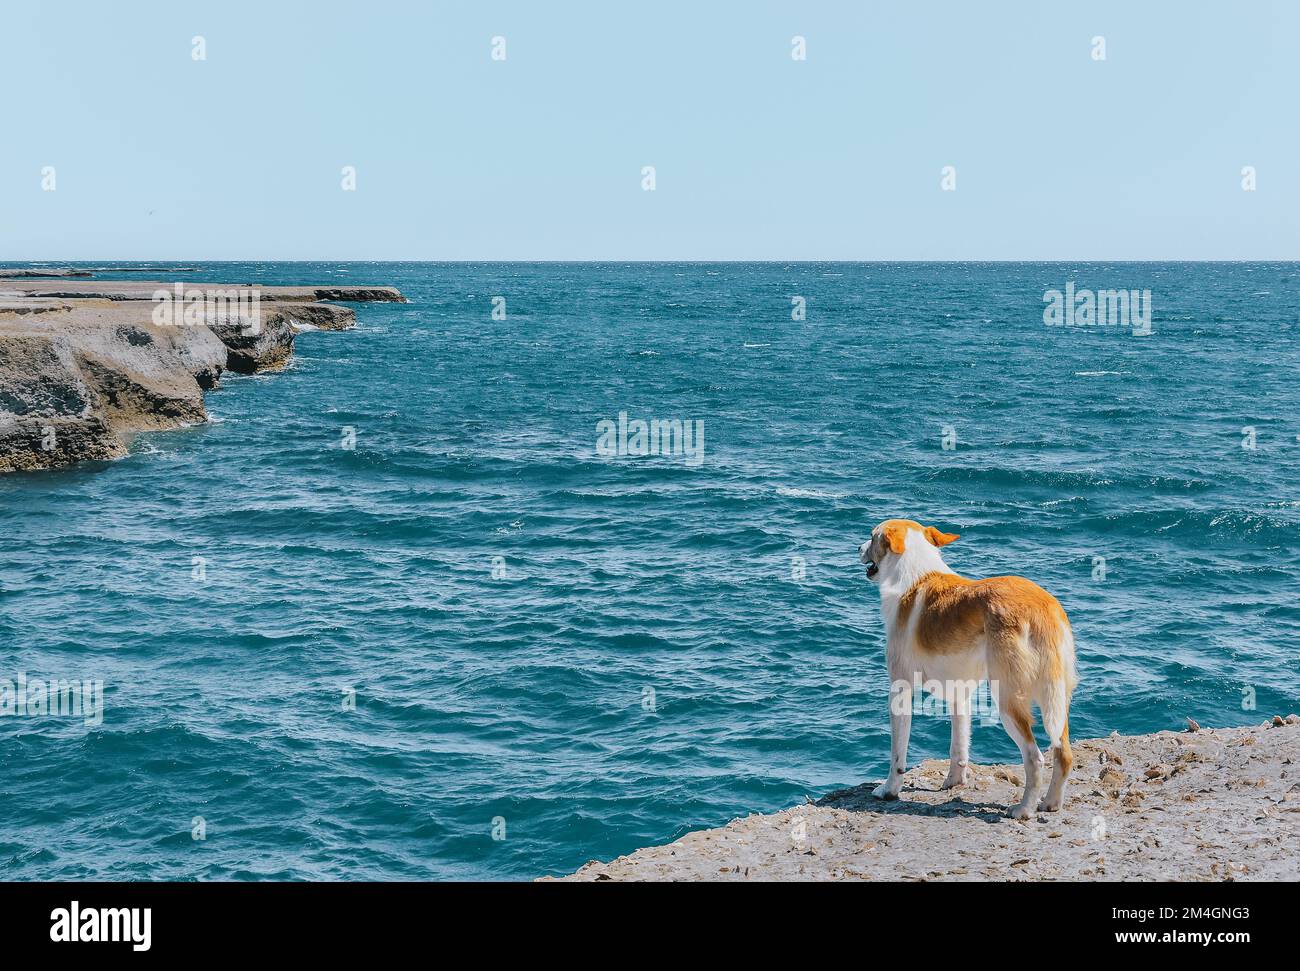 A dog looking the sea on a cliff in Peninsula Valdes, Chubut province, Argentina Stock Photo